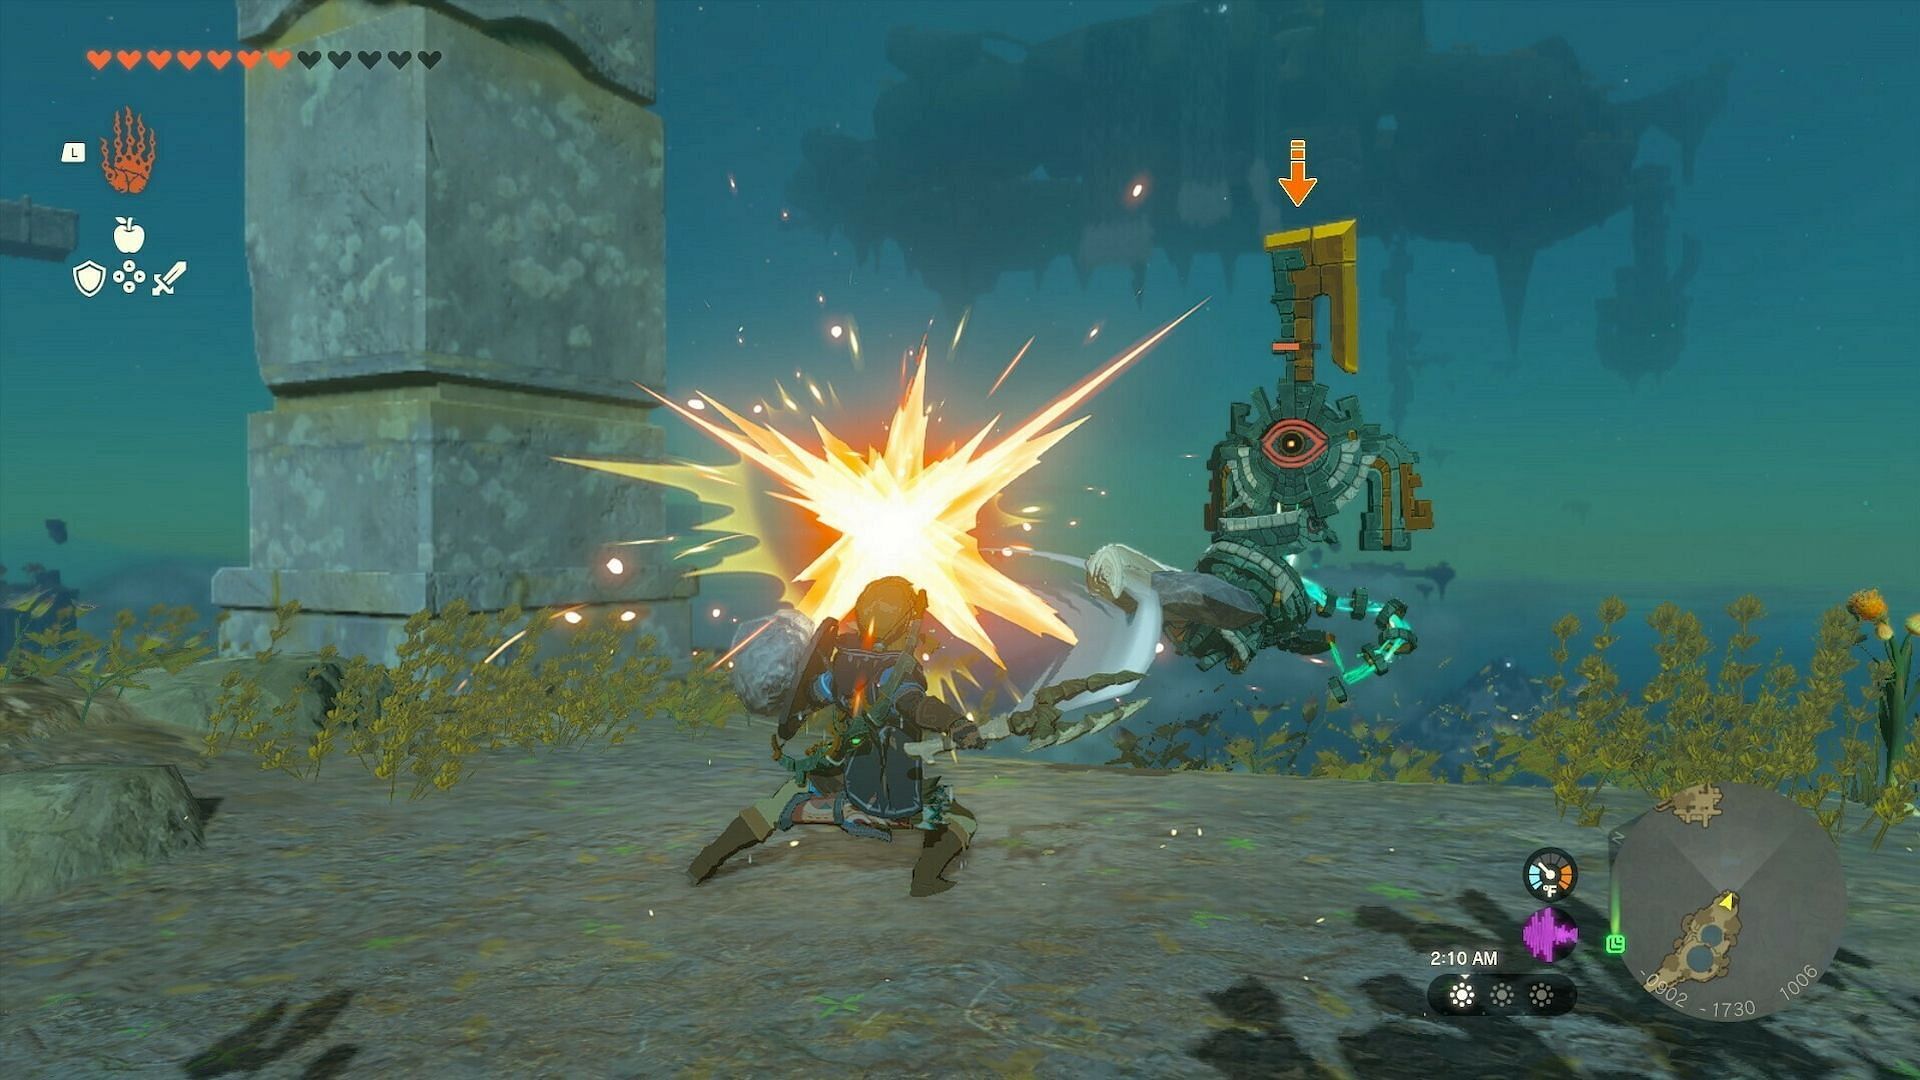 Gaining an edge in combat and 4 other best uses of Recall ability in The Legend of Zelda Tears of the Kingdom (Image via Nintendo)